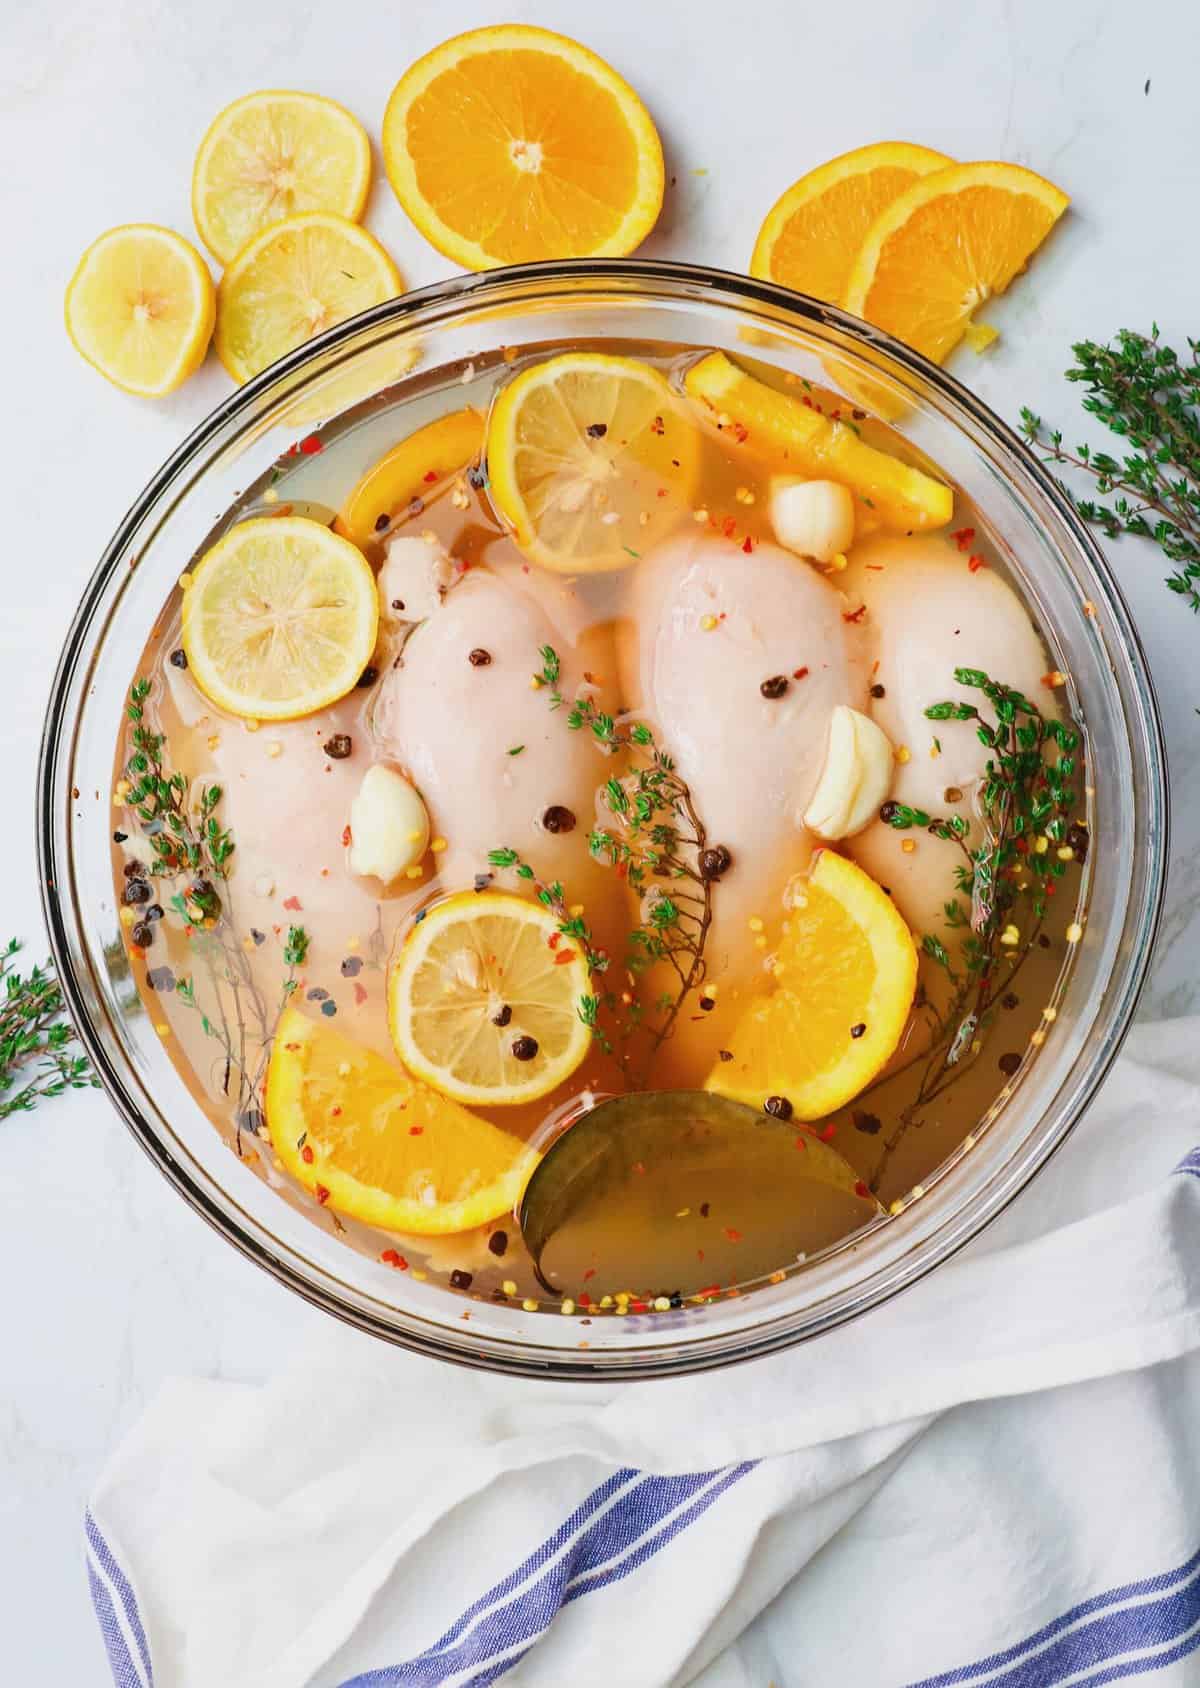 Brine chicken breasts for the grill is so easy